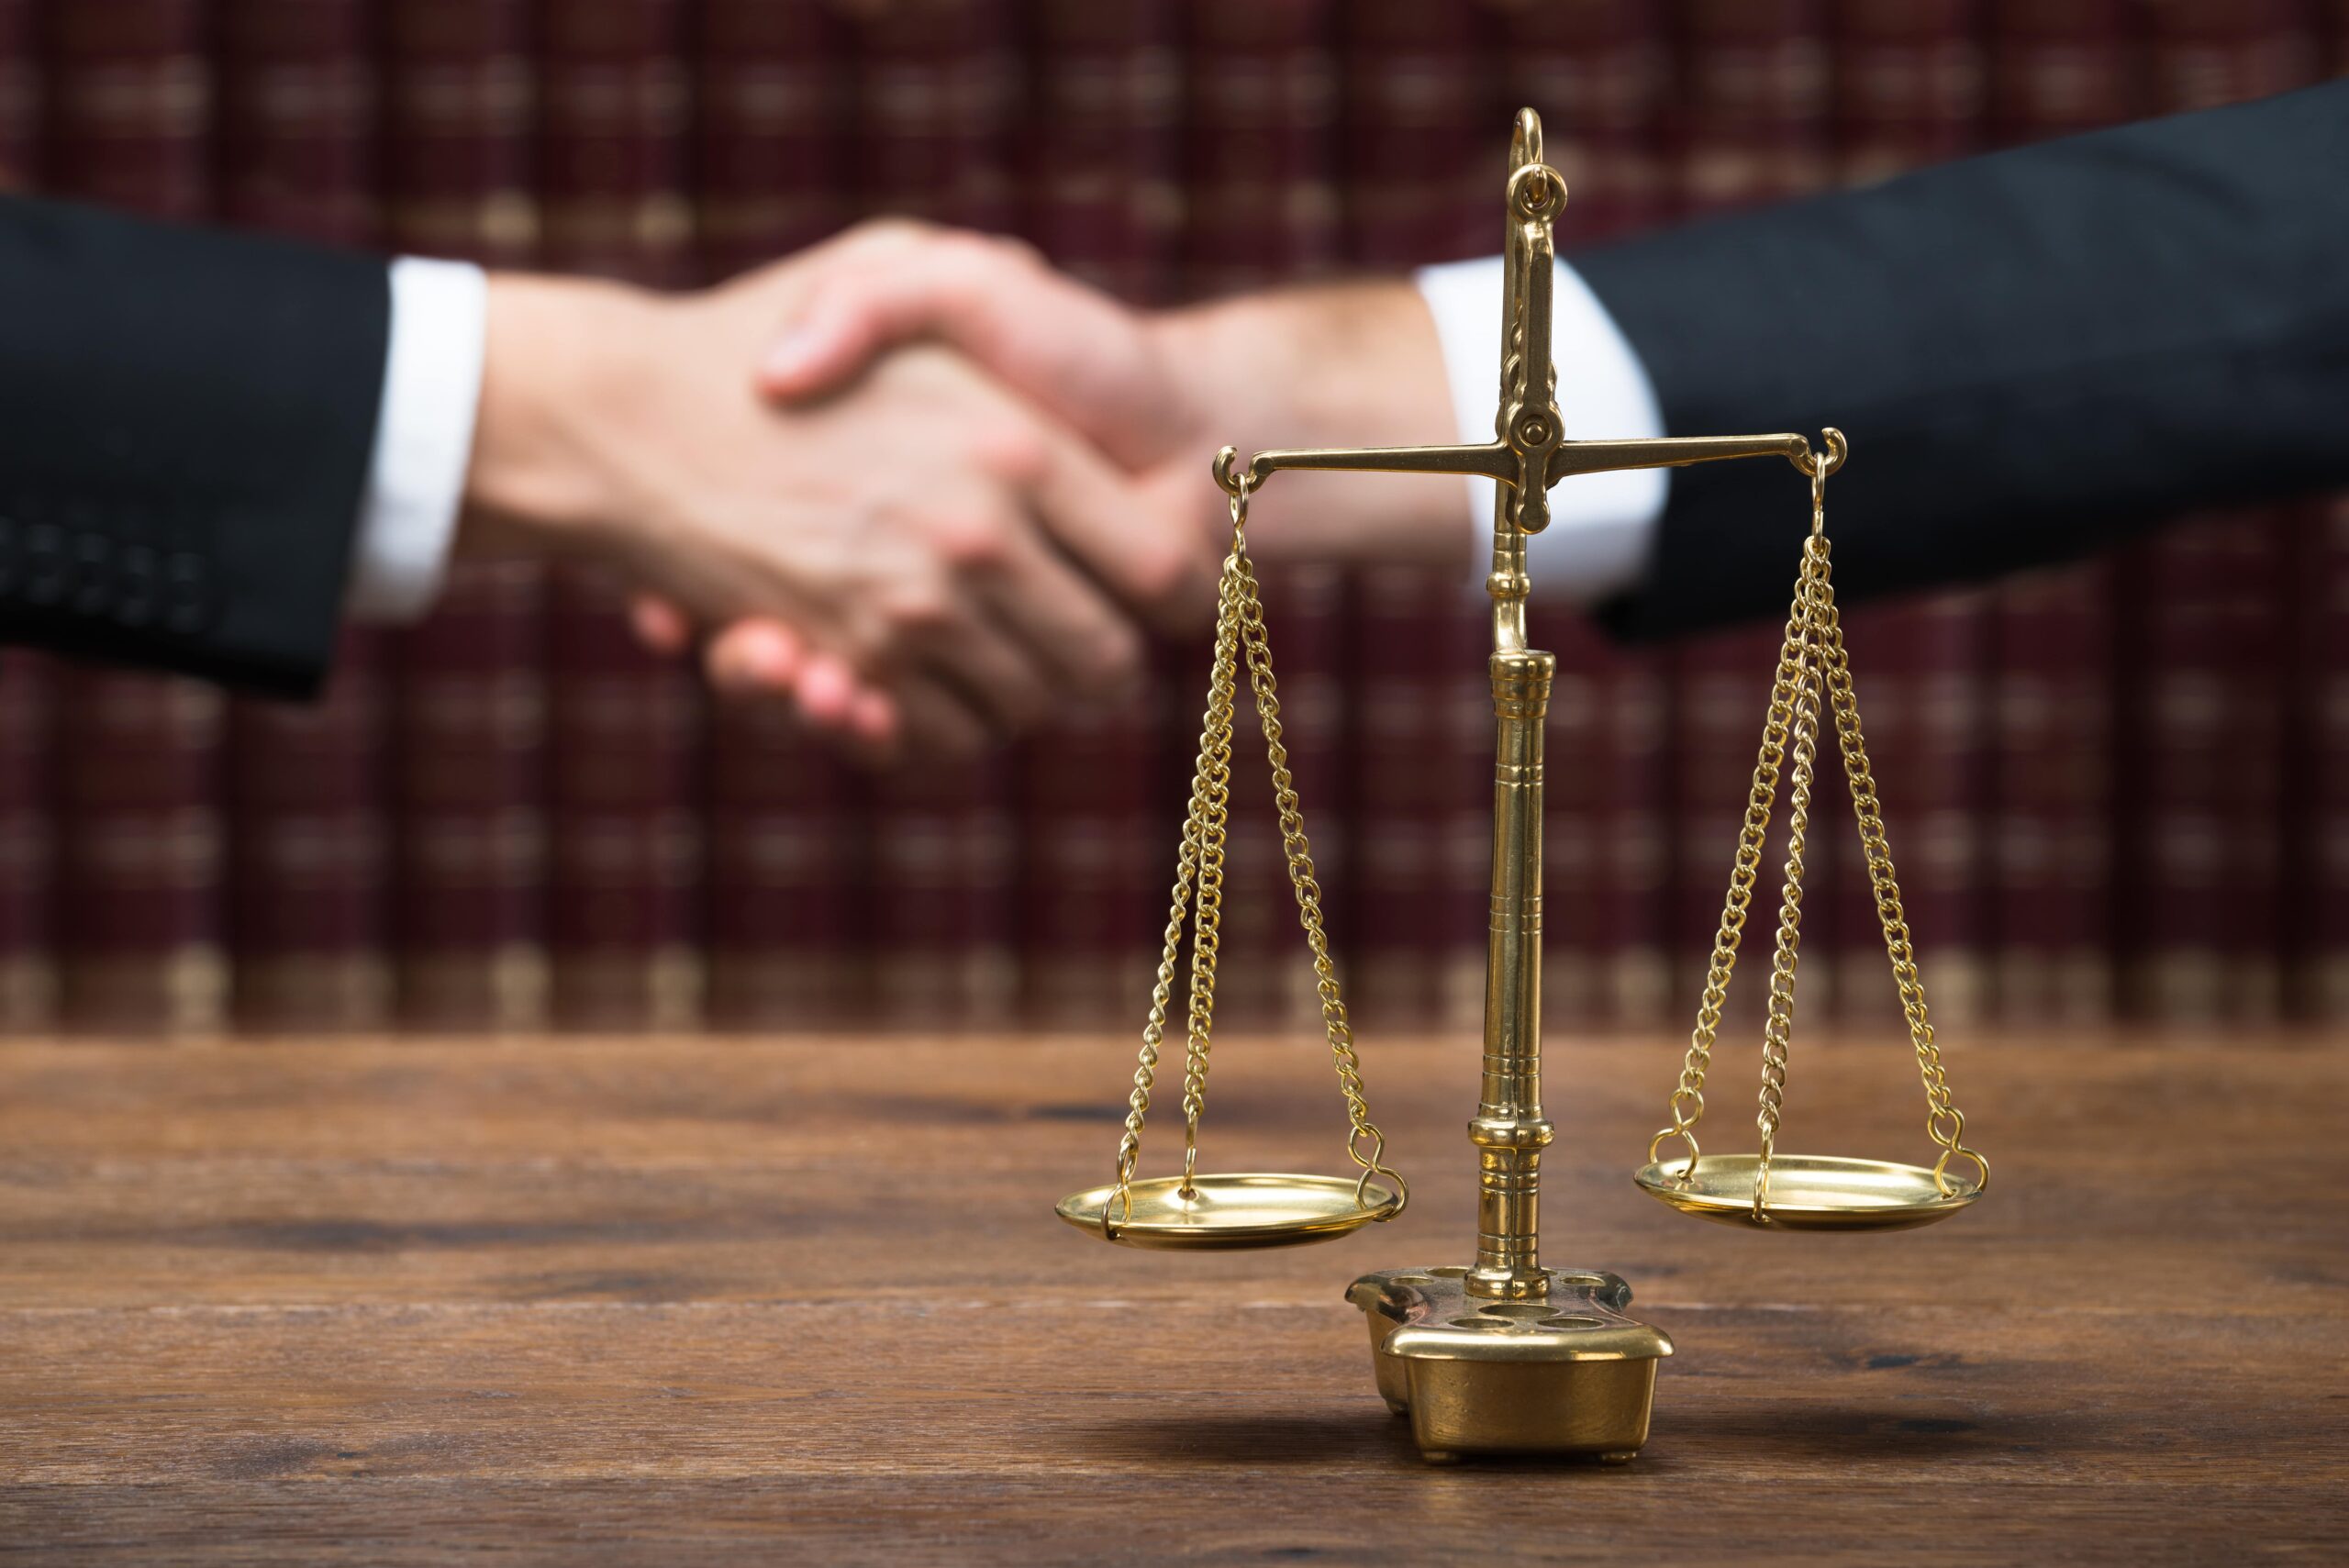 Two professionals shaking hands behind scales of justice